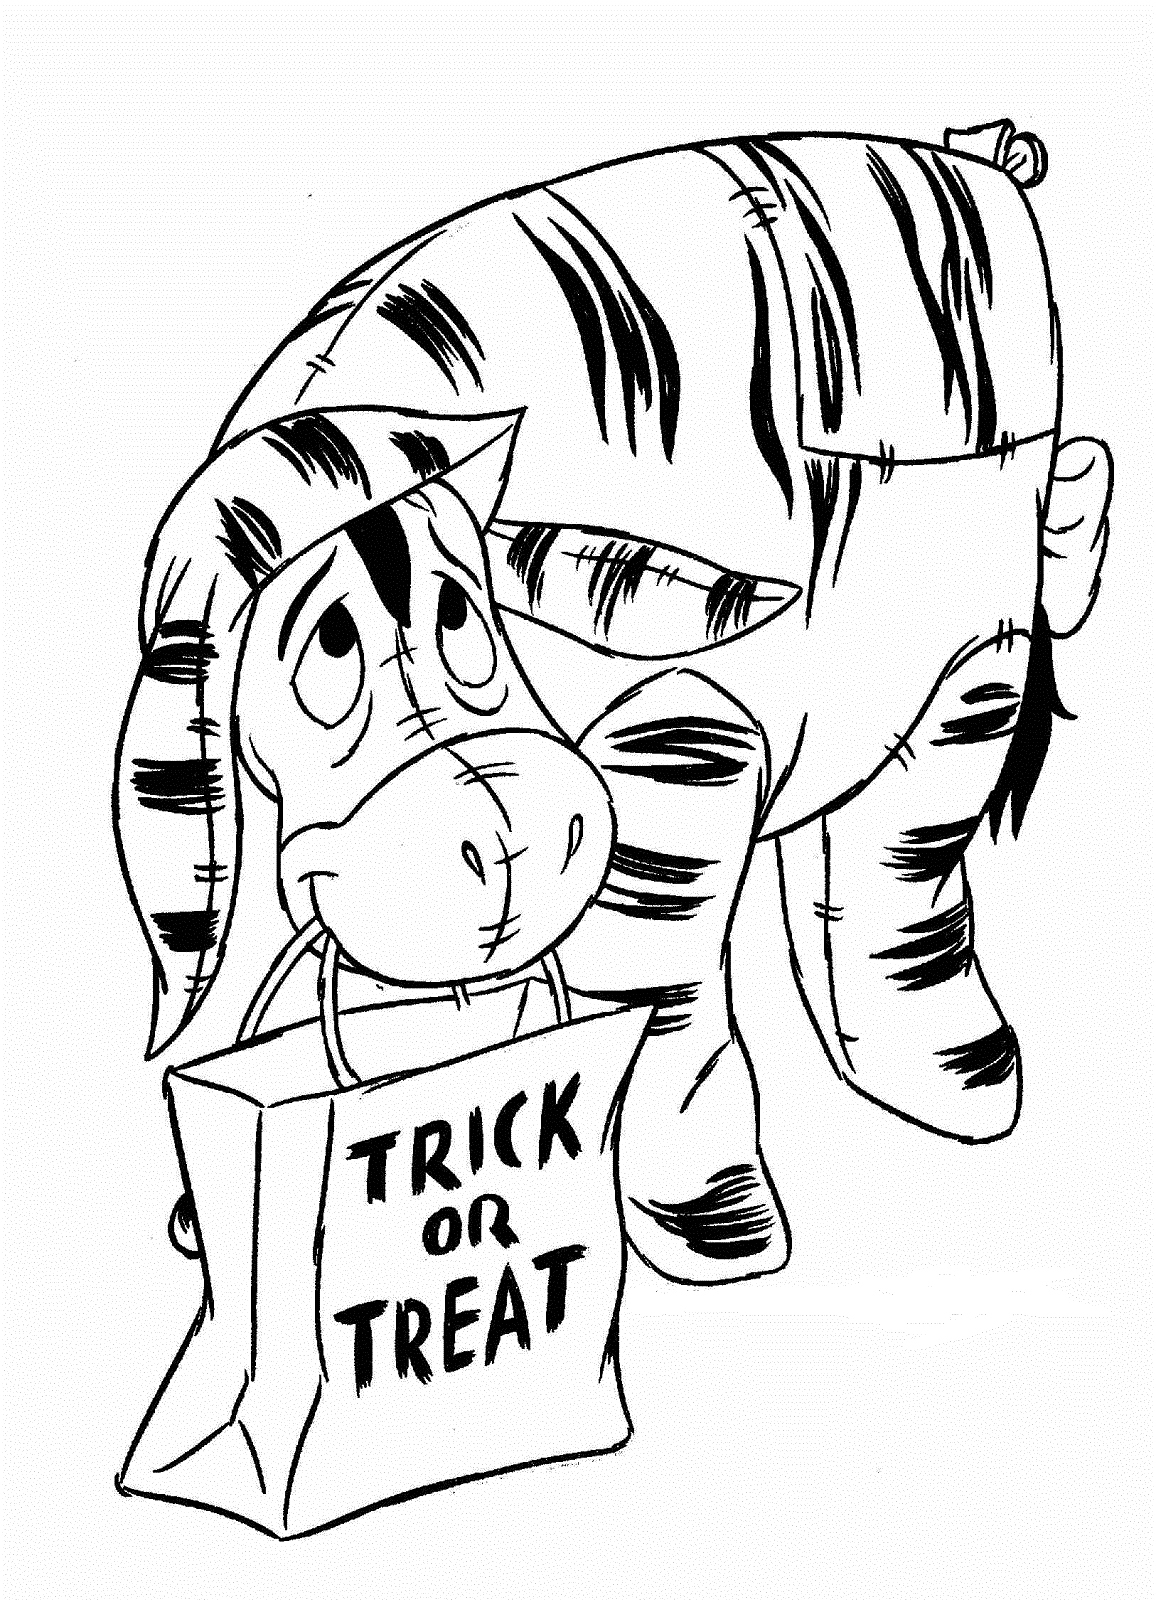 Disney Halloween Coloring Pages Best Coloring Pages For Kids